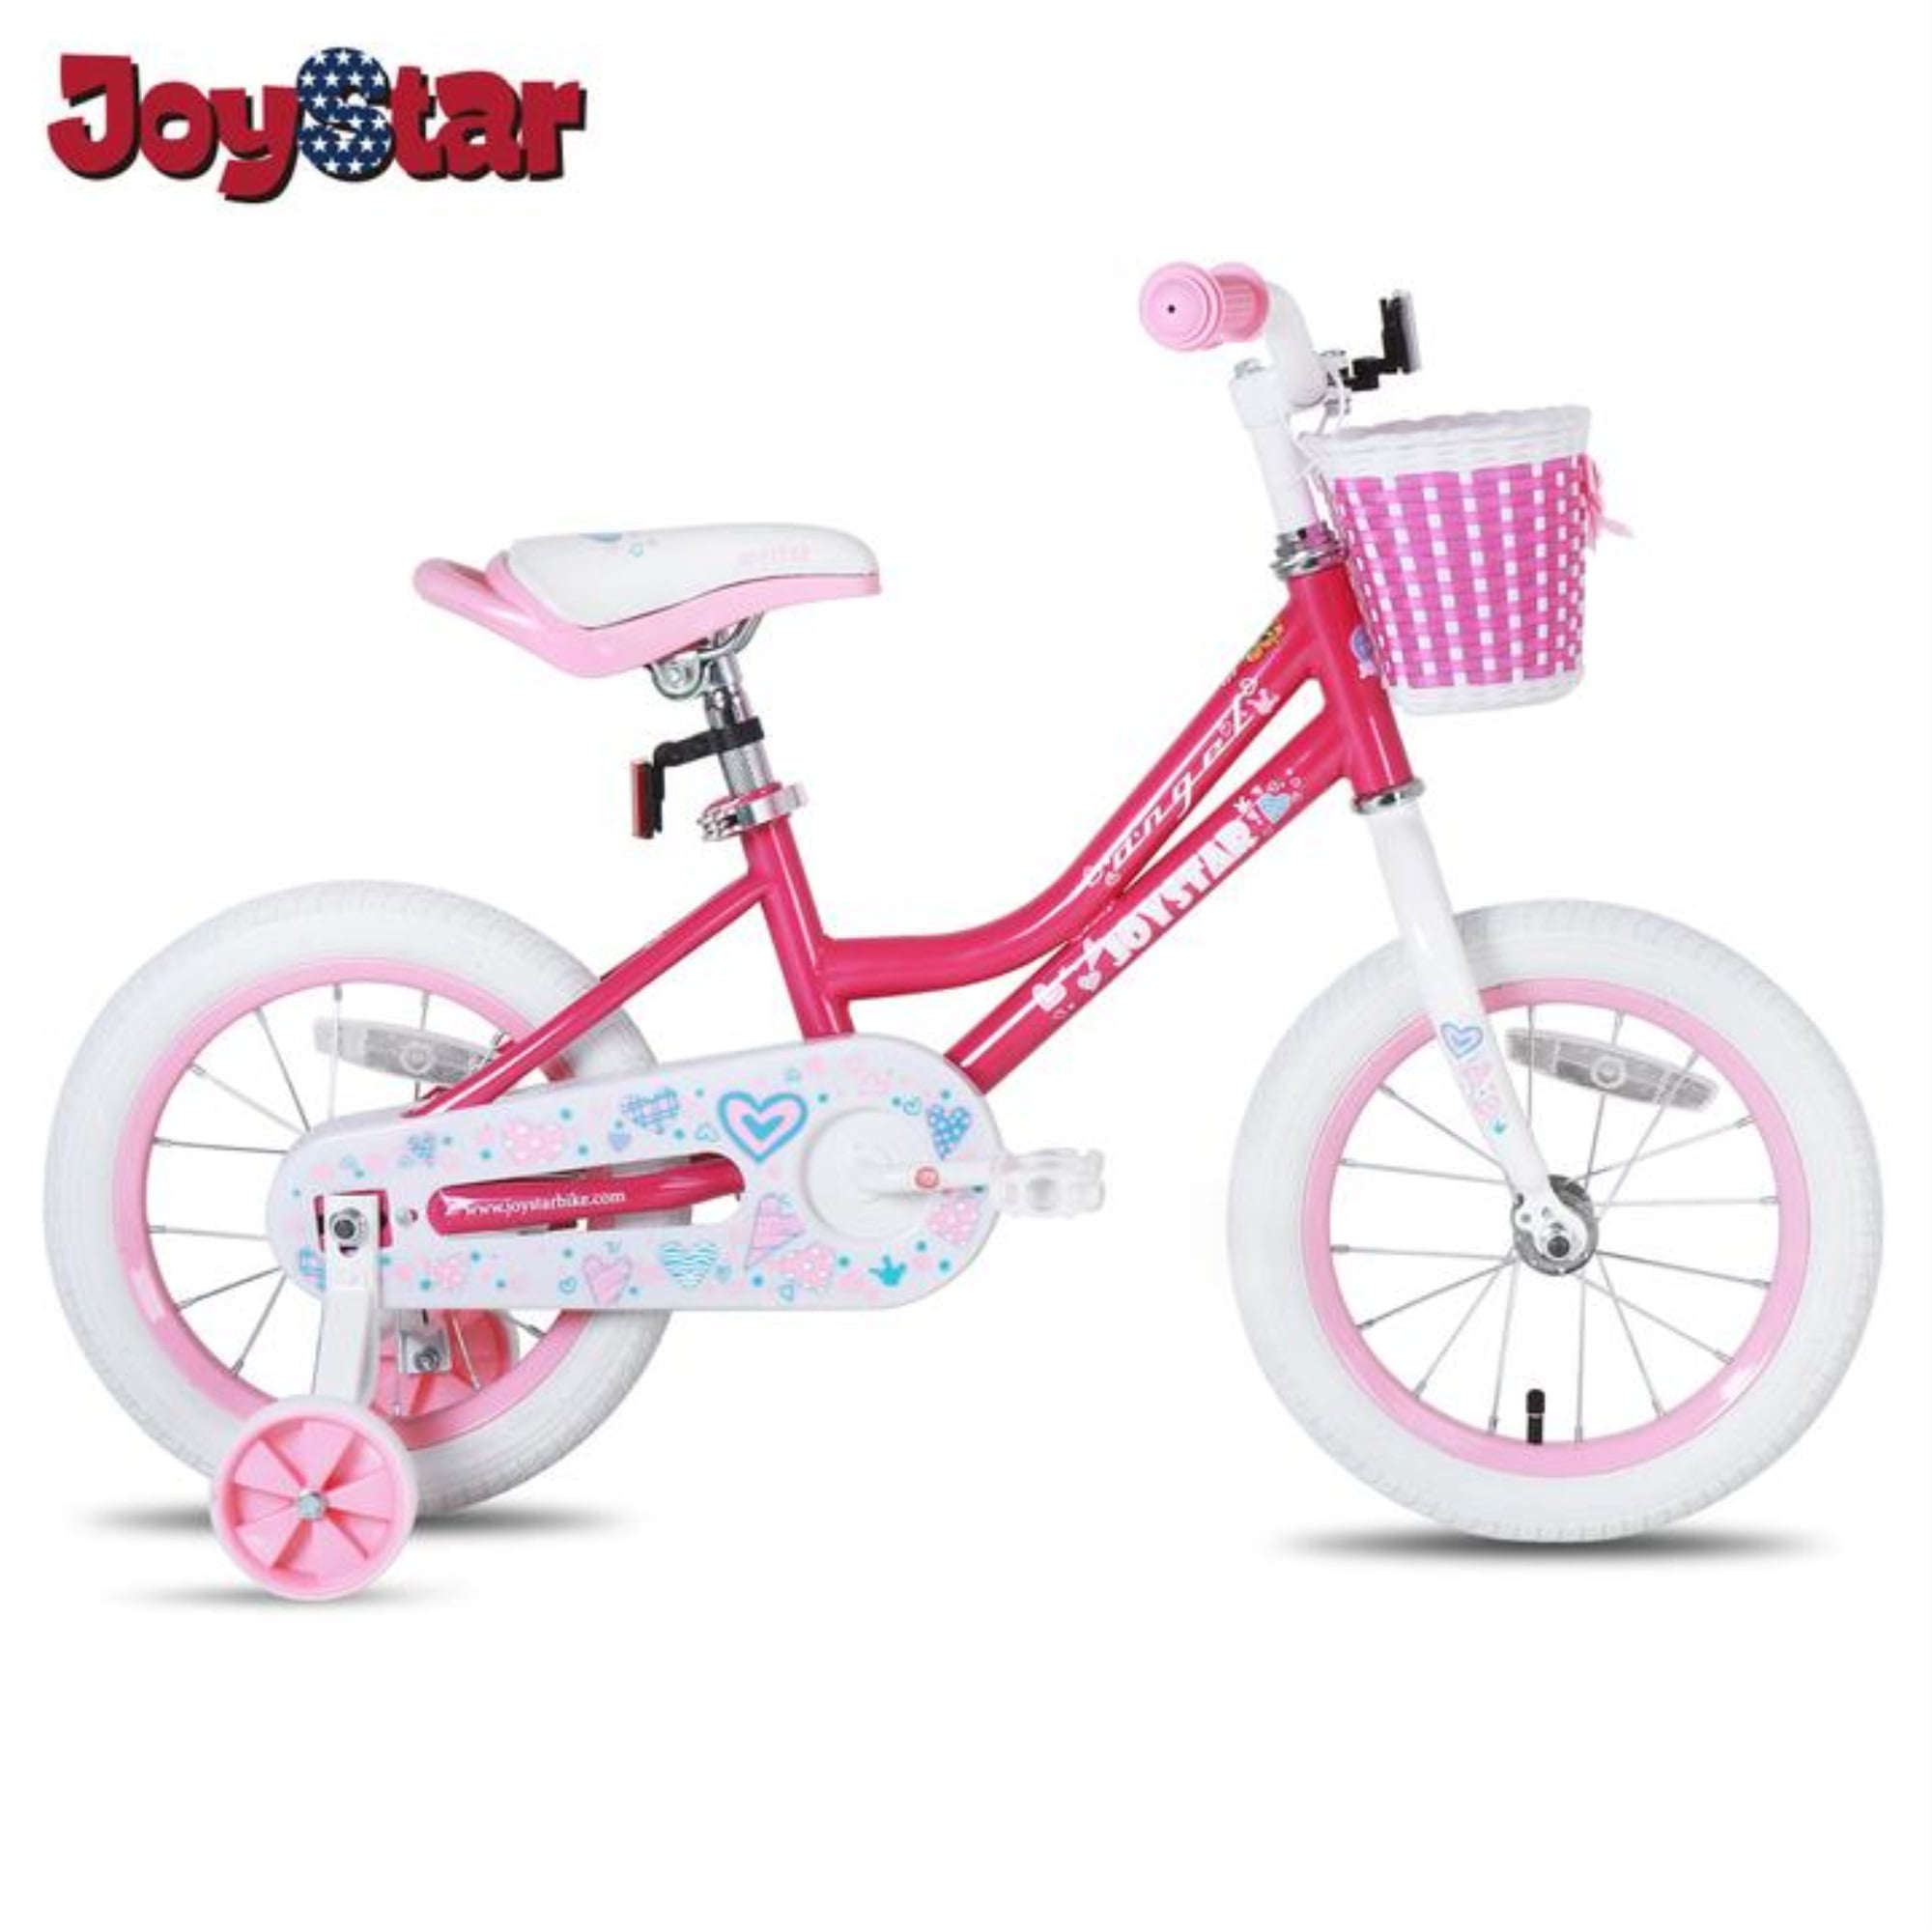 OPAW043-F PAW PATROL BICYCLE WITH ADJUSTABLE SEAT PINK/WHITE 